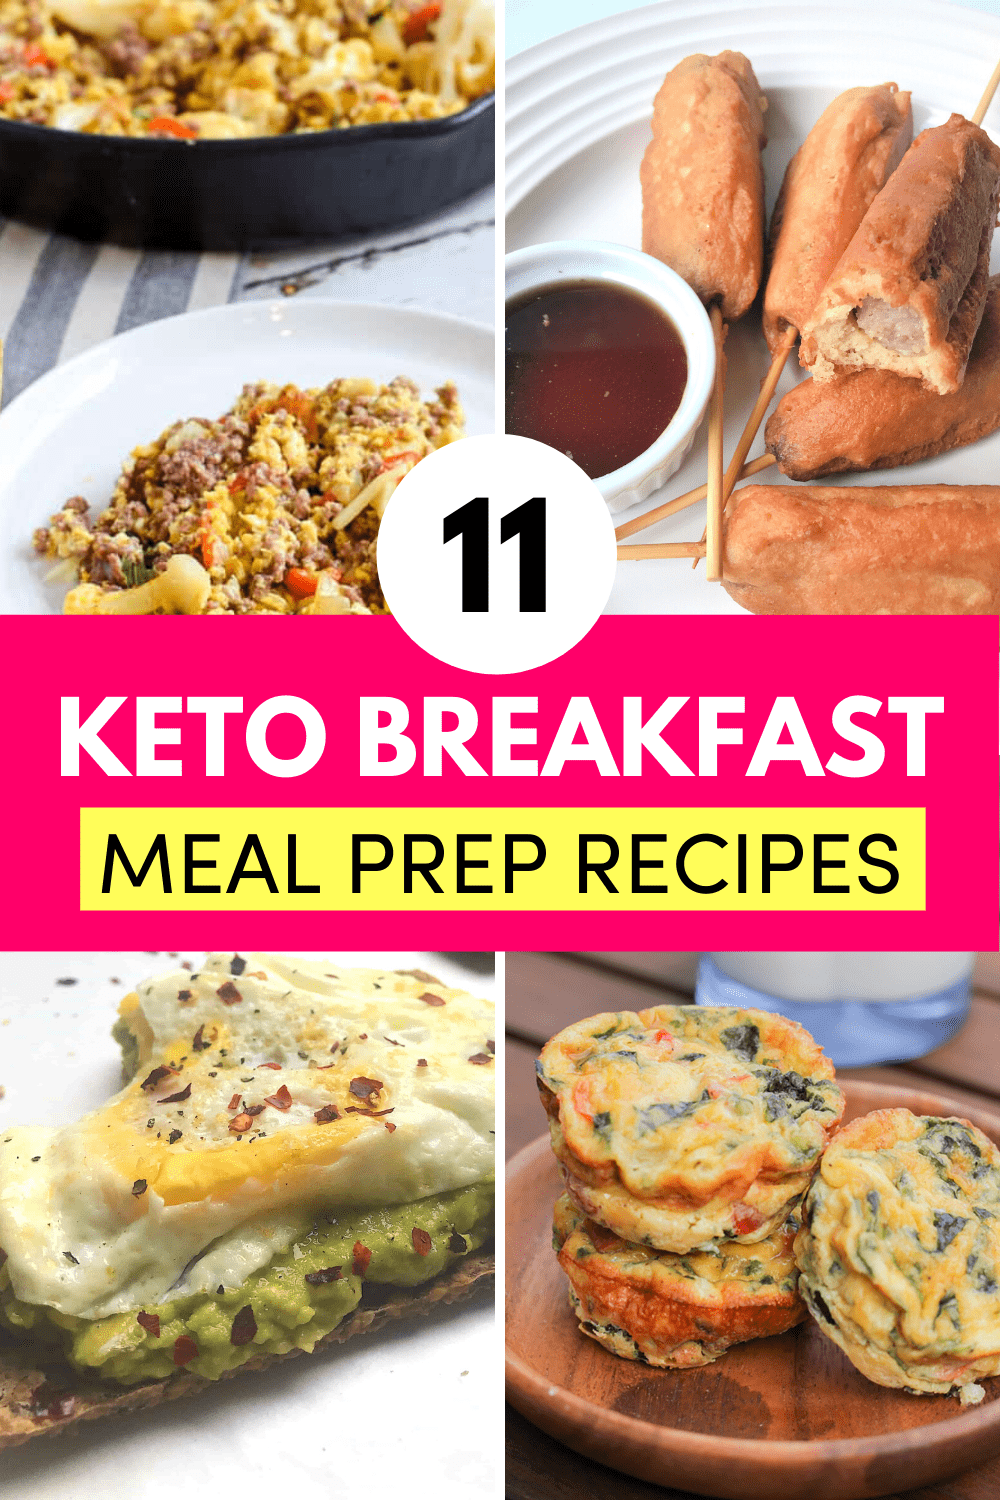 Breakfast Meal Prep  Lunch recipes healthy, Breakfast meal prep, Easy  healthy meal prep